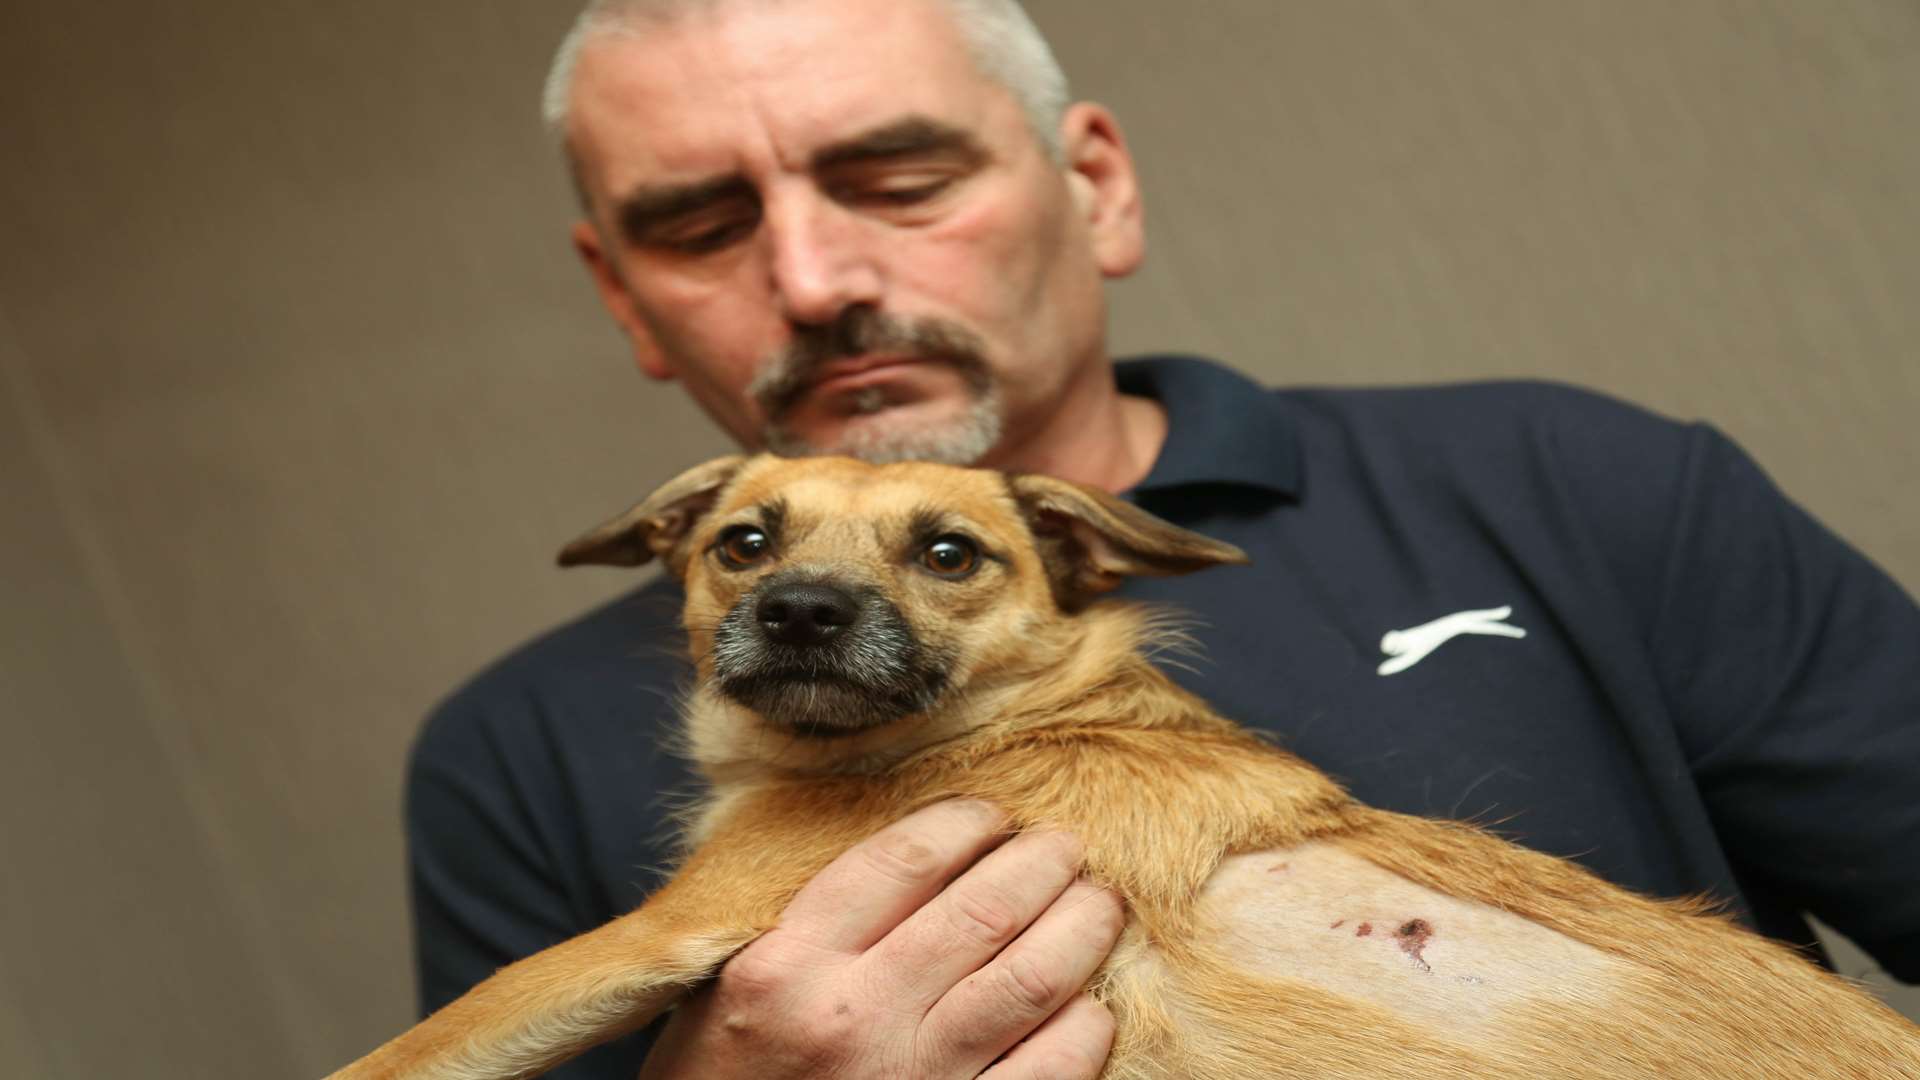 John Ellett's dog Lilly was badly injured when she was attacked by two dogs